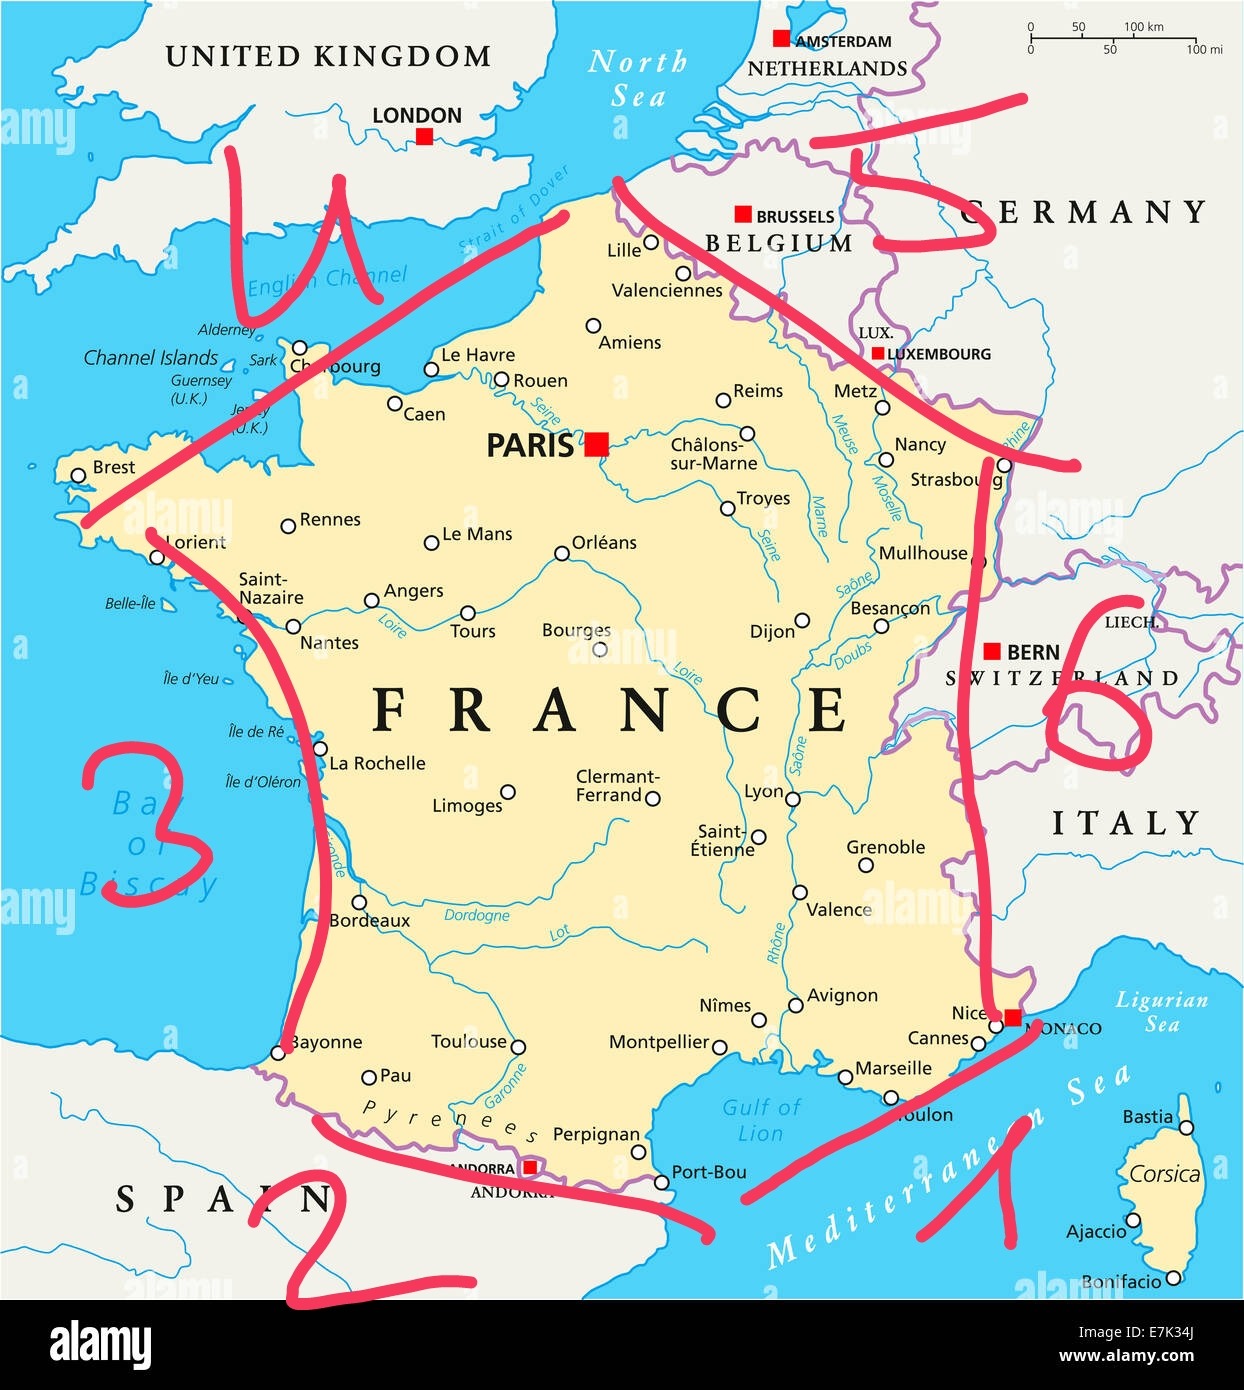 beingcuteismything:yotaasuke:  vang0bus:  vang0bus:  aratakichiban:  gender-void-partially-stars:  aratakichiban:  gender-void-partially-stars:  why is france called the hexagon when its abundantly clear that it’s a pentagon   what   mmm i guess i see